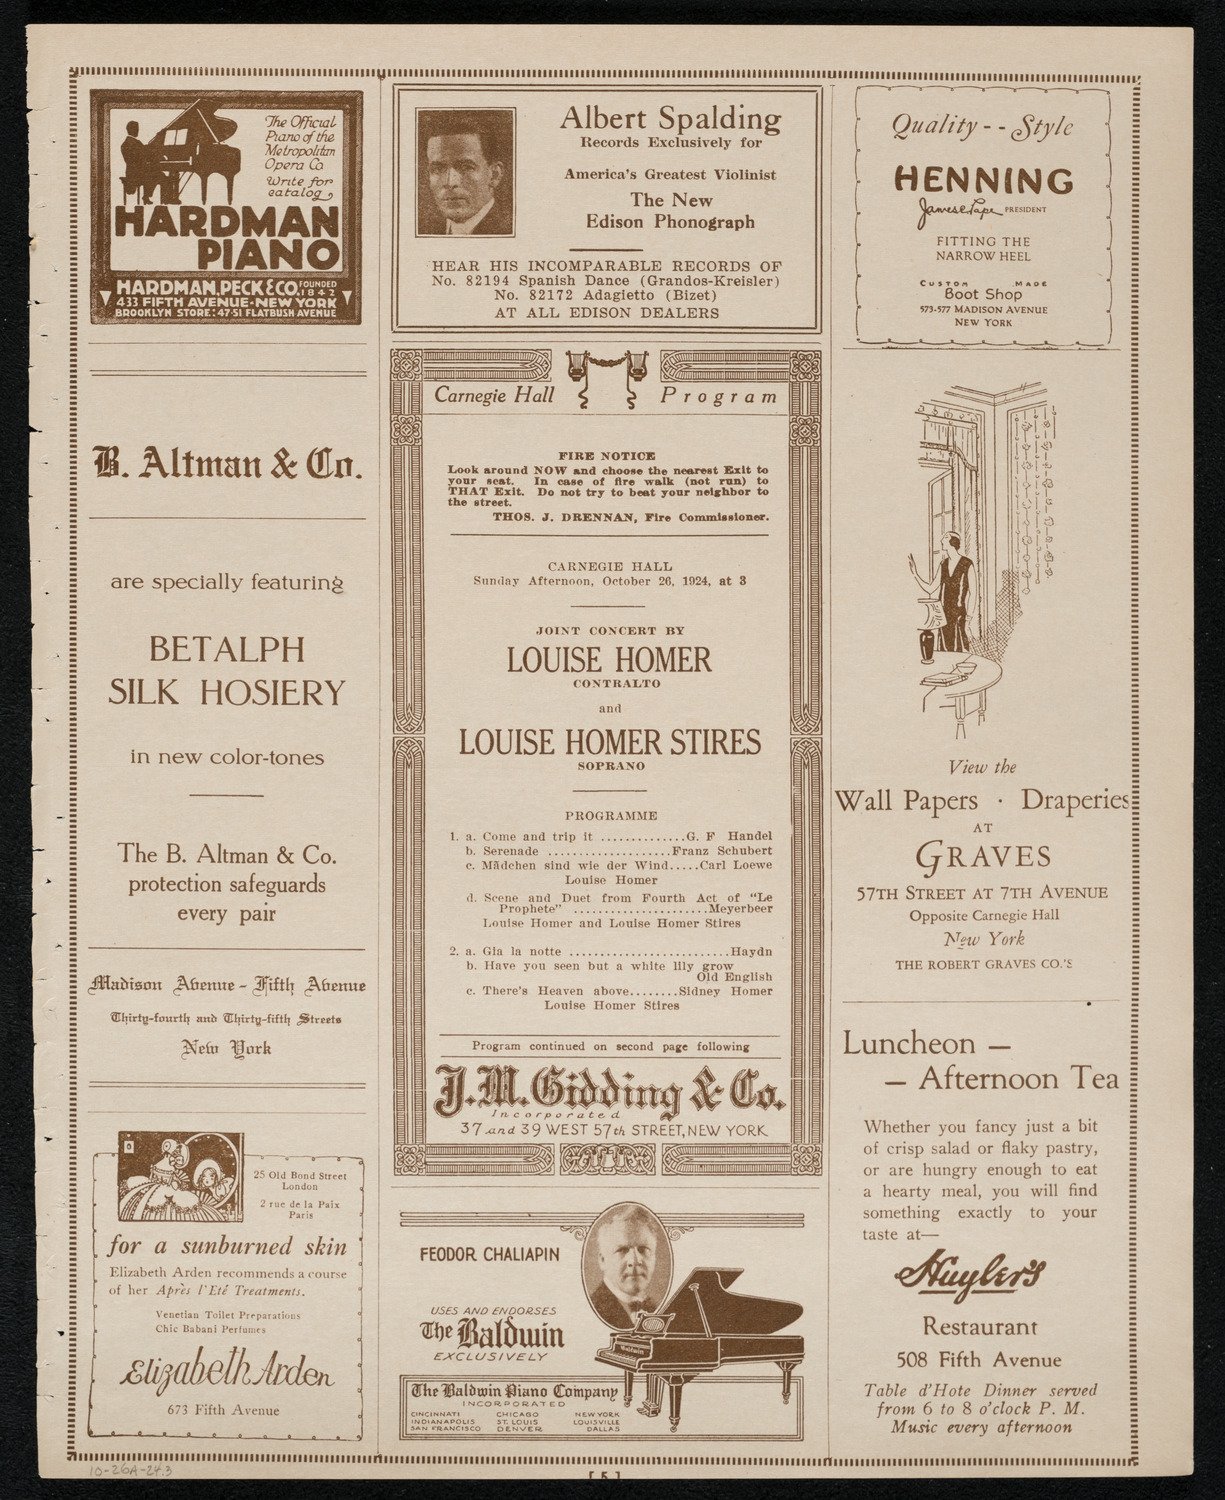 Louise Homer, Contralto, and Louise Homer Stires, Soprano, October 26, 1924, program page 5